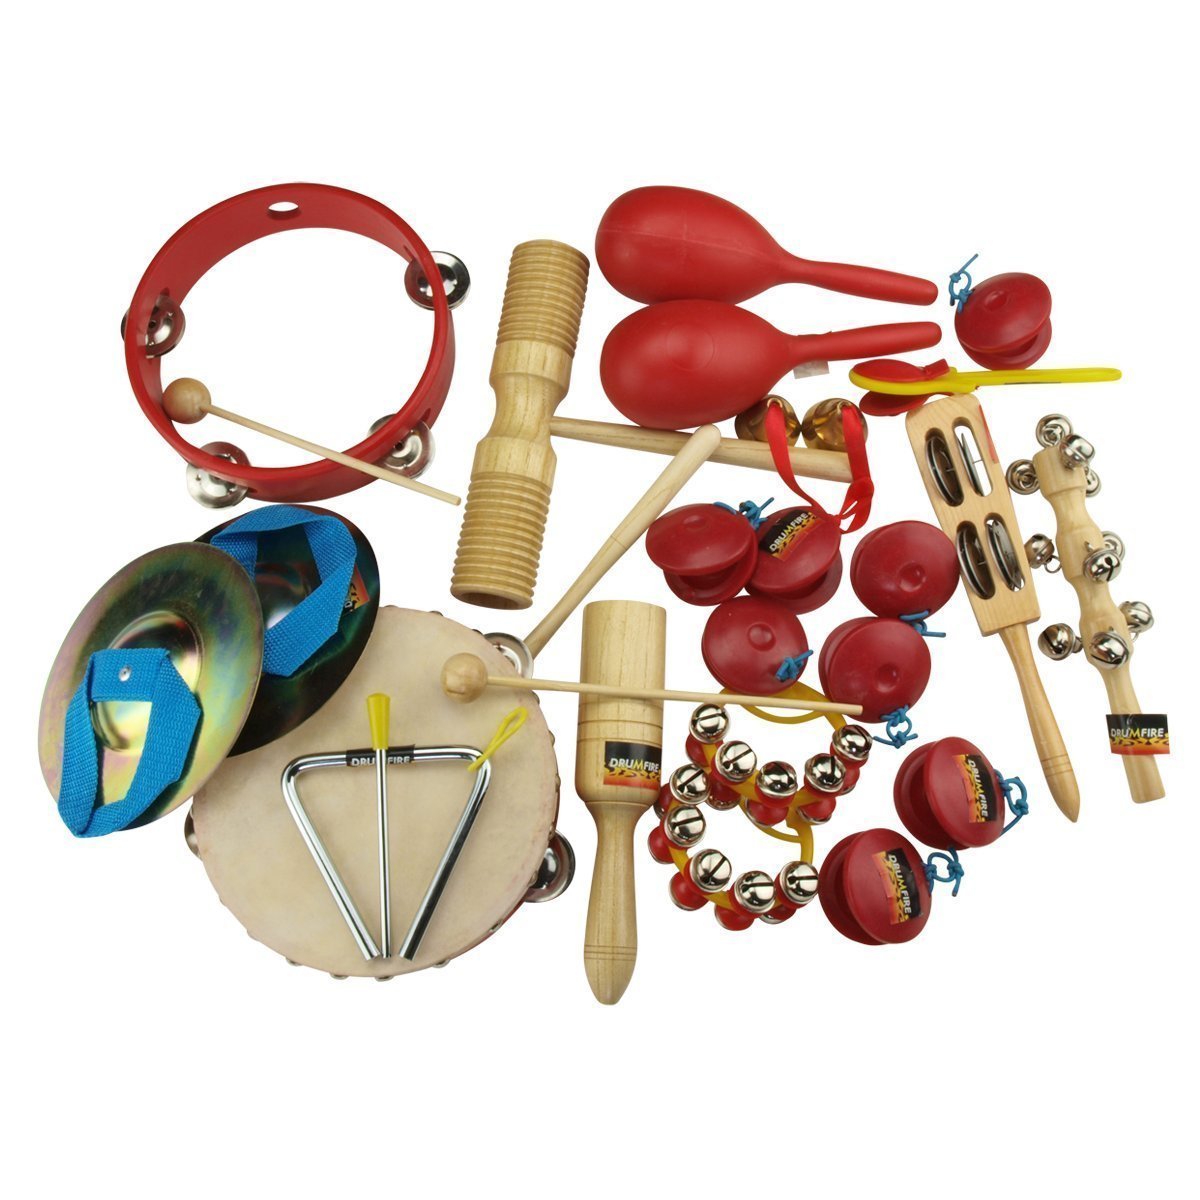 Drumfire Hand Percussion Set with Carry Case (17-Piece)-DFP-PP3-COL